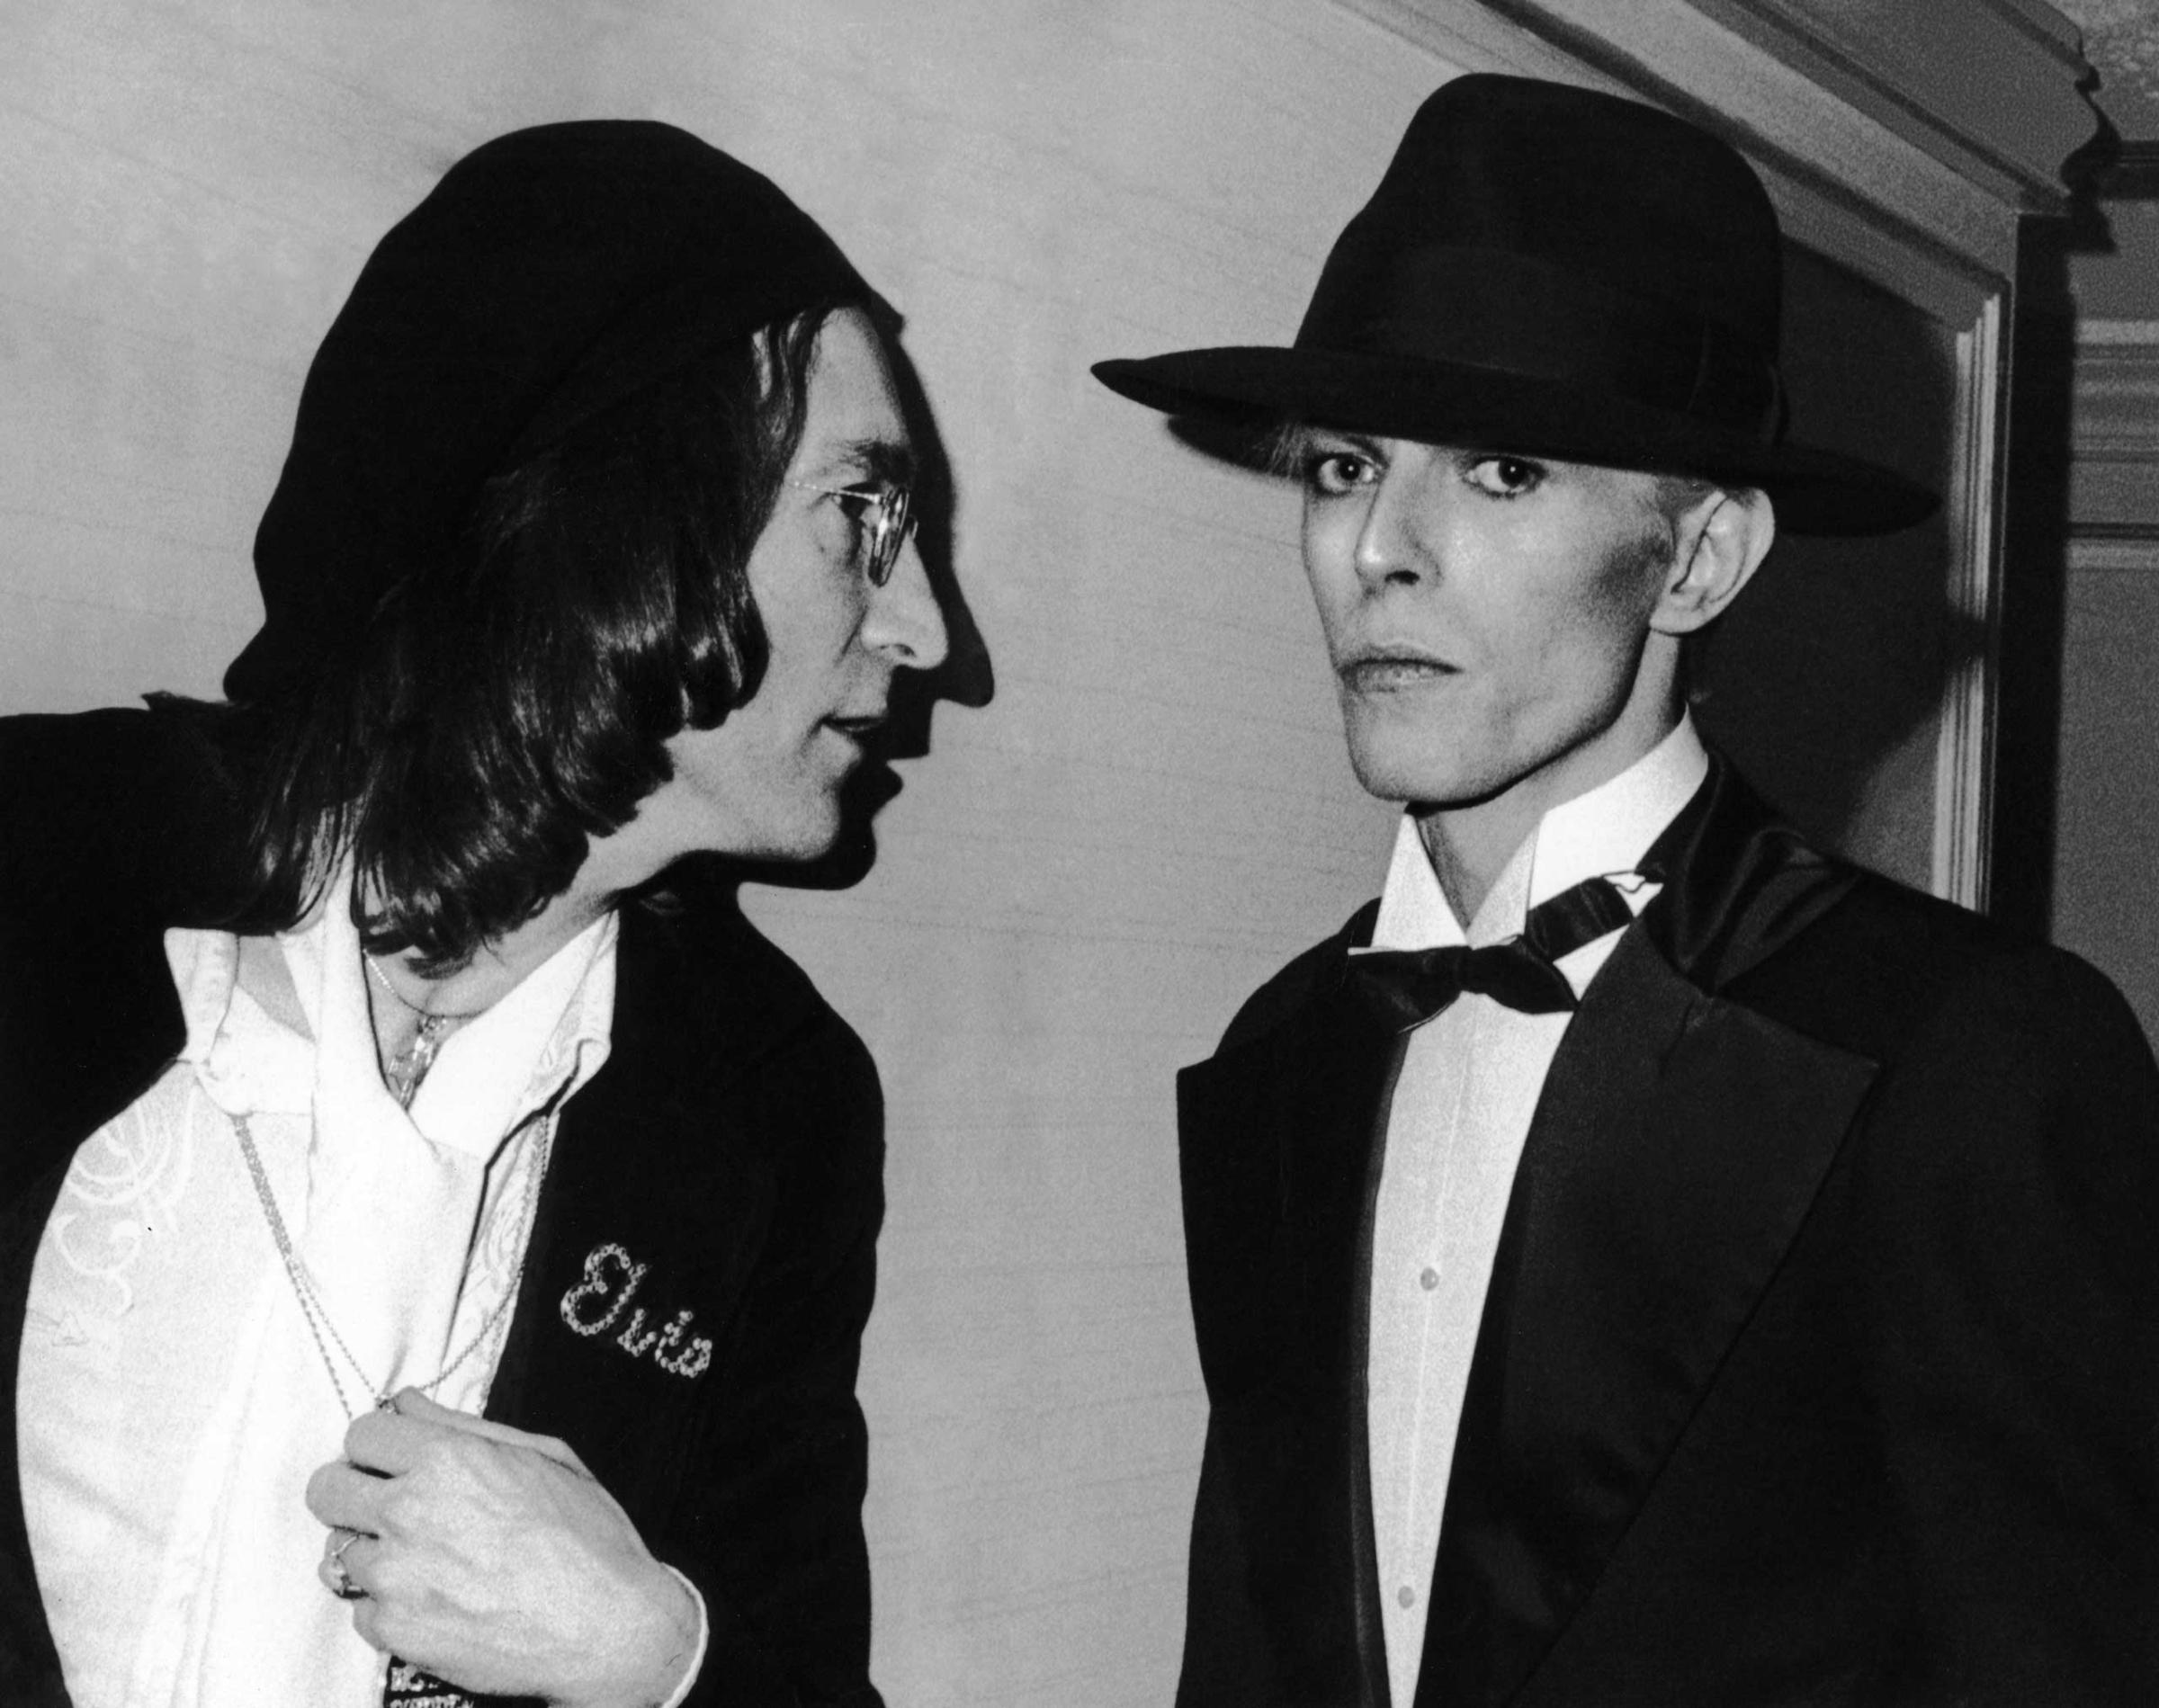 John Lennon and David Bowie at 17th Annual Grammy Awards After-Party at Essex House, New York on March 1, 1975.